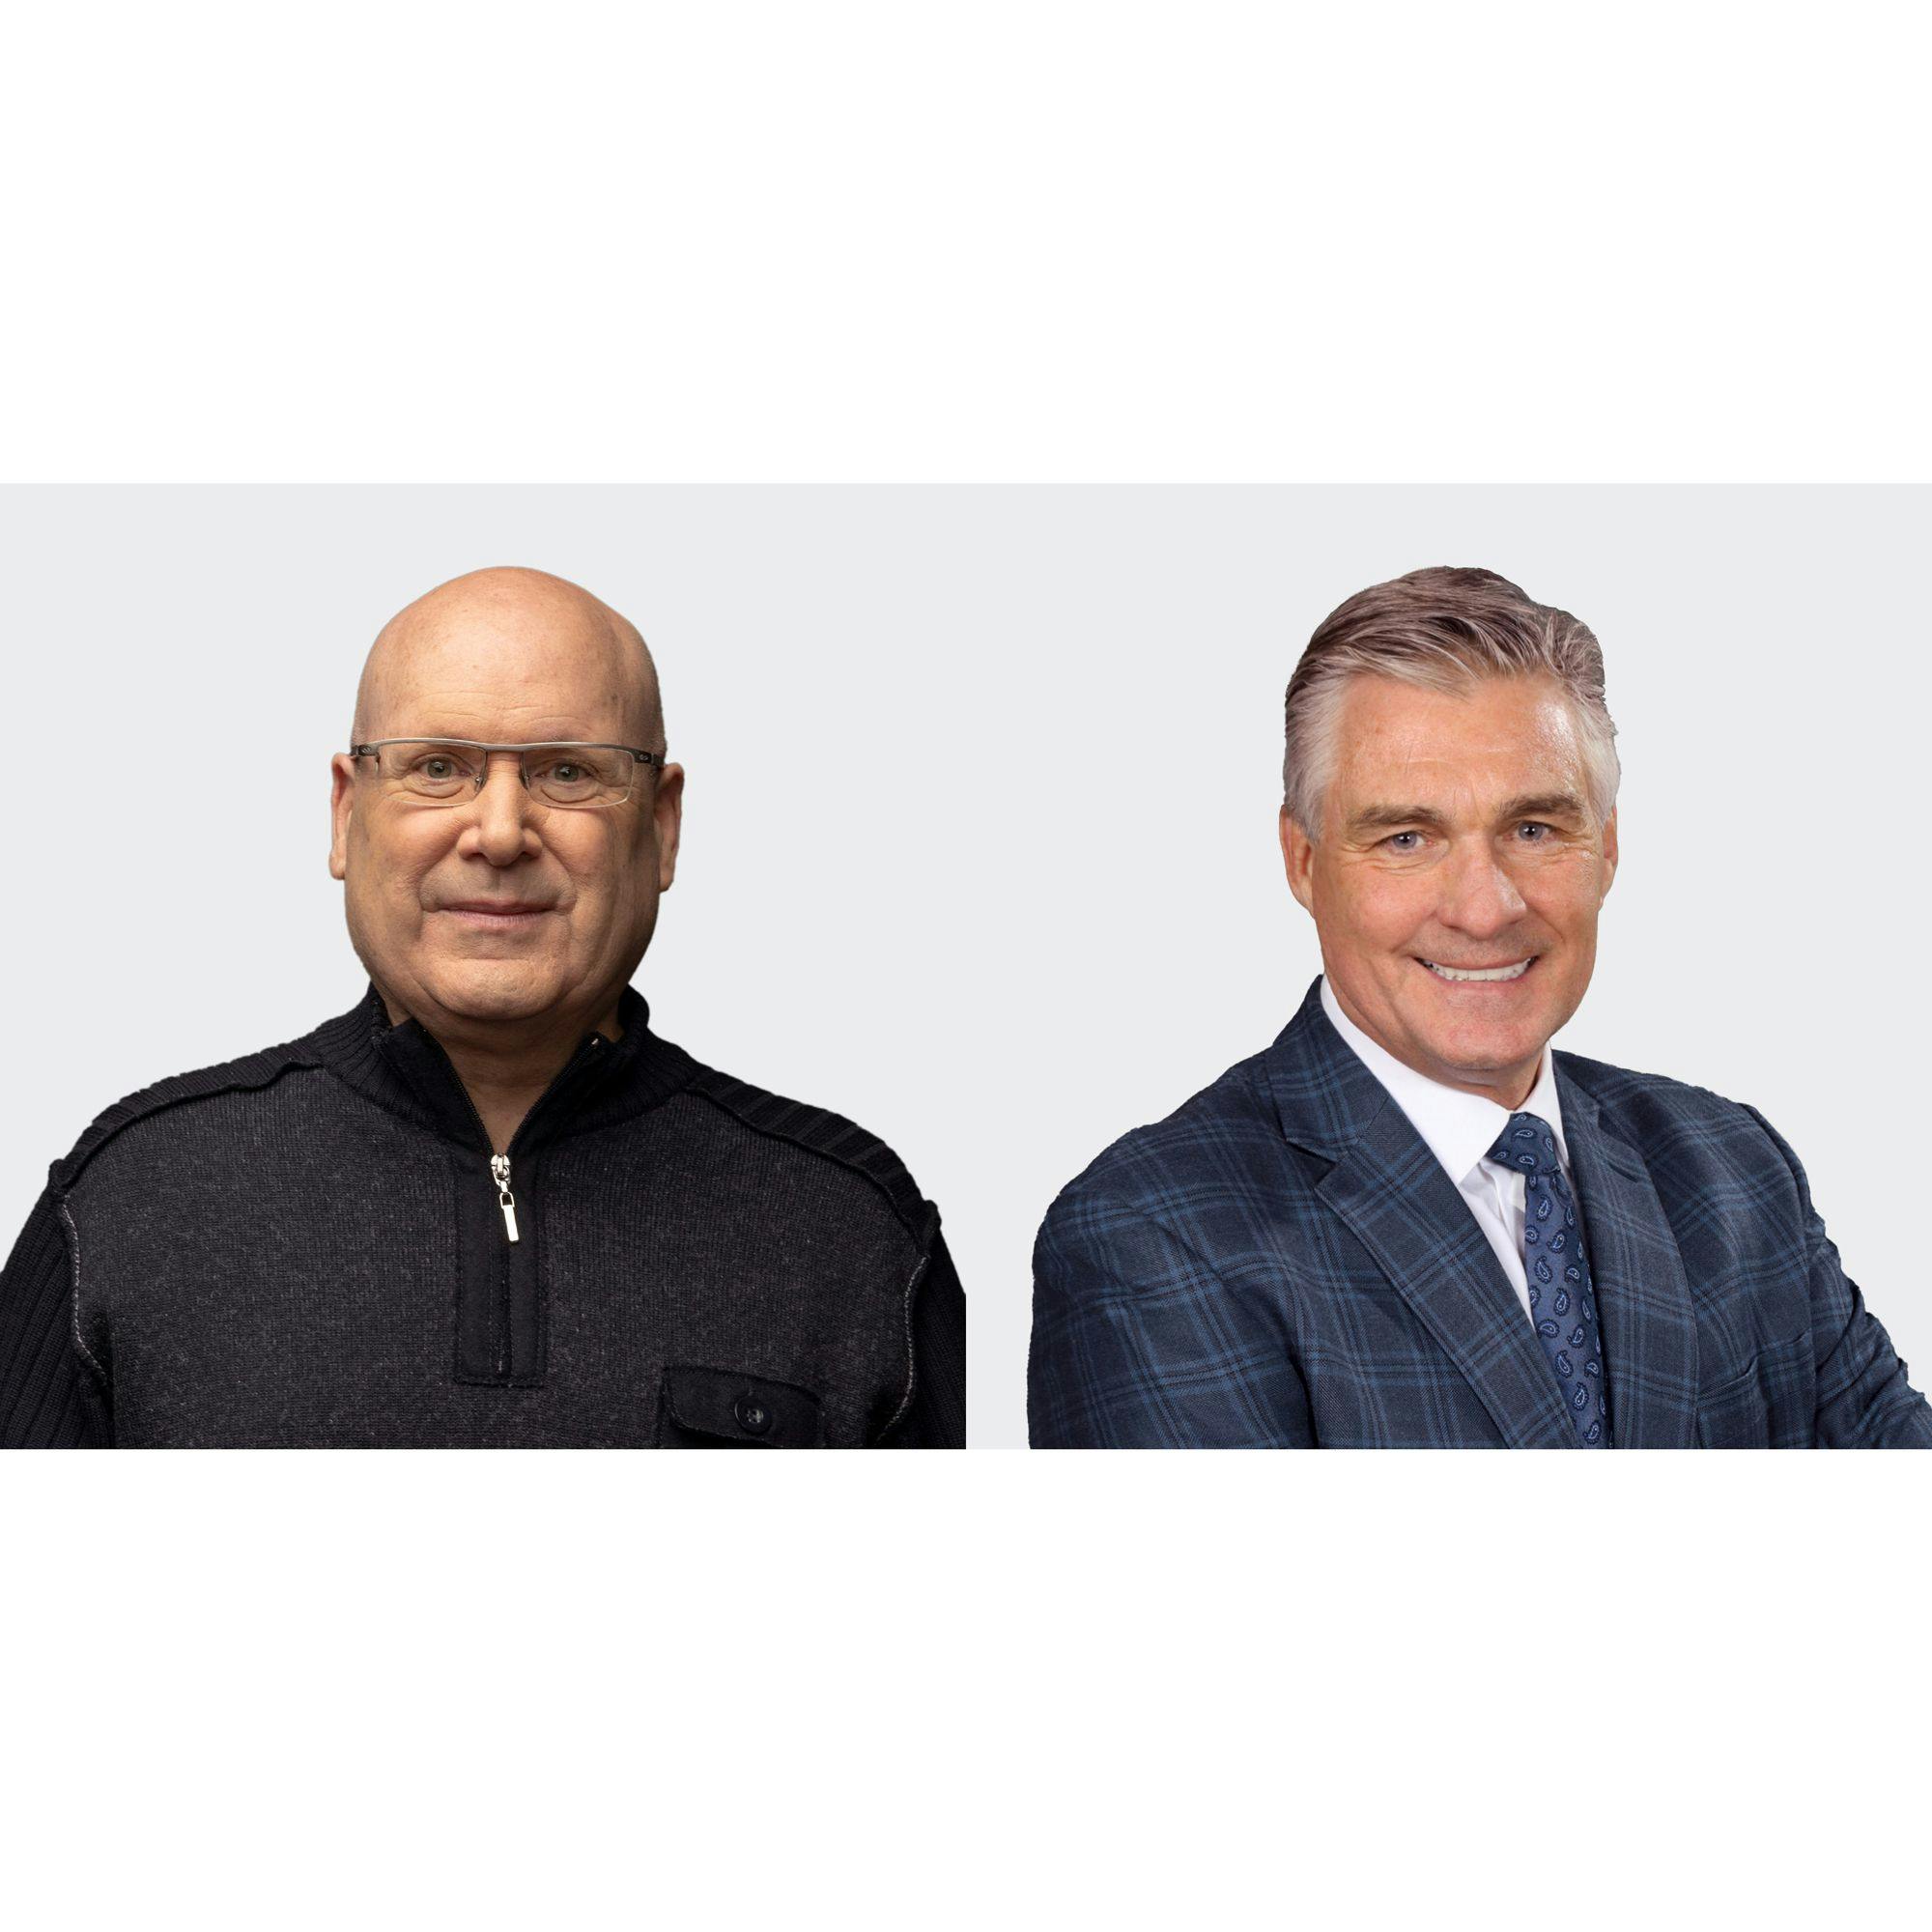 Industry Experts Dr Lou Shuman and Dr Brian Gray Join Candid Leadership